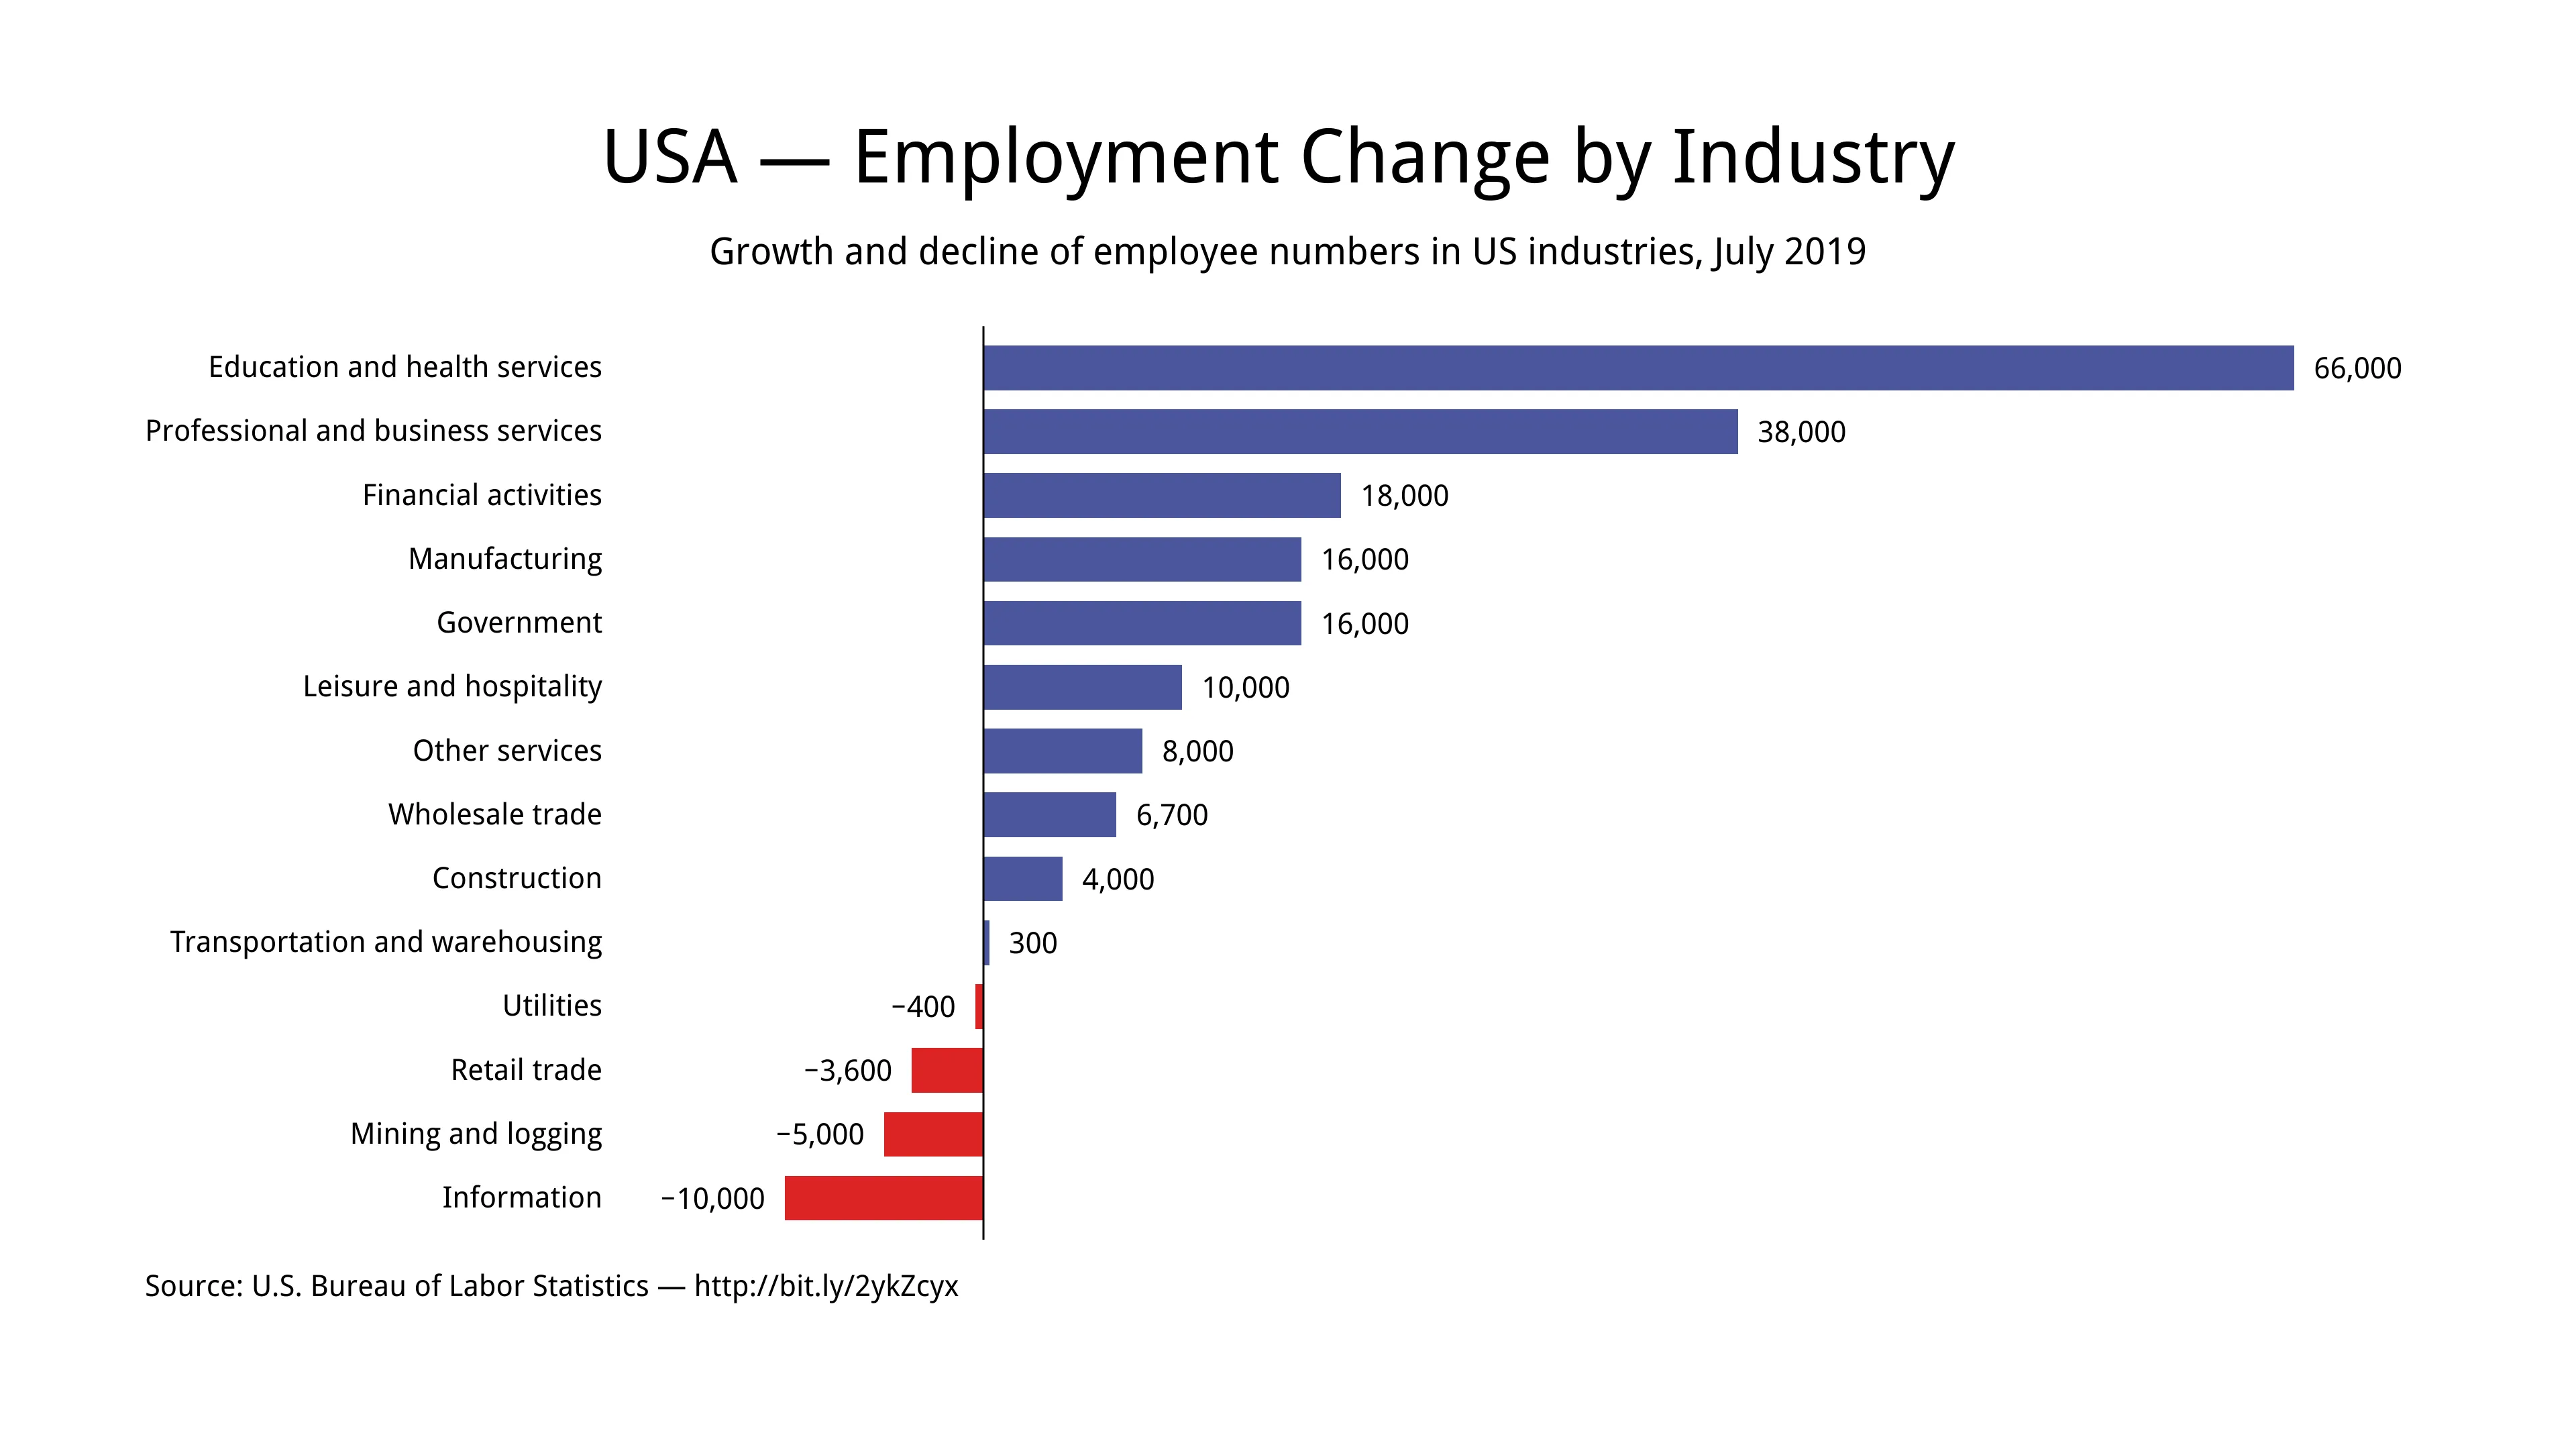 USA — Employment Change by Industry